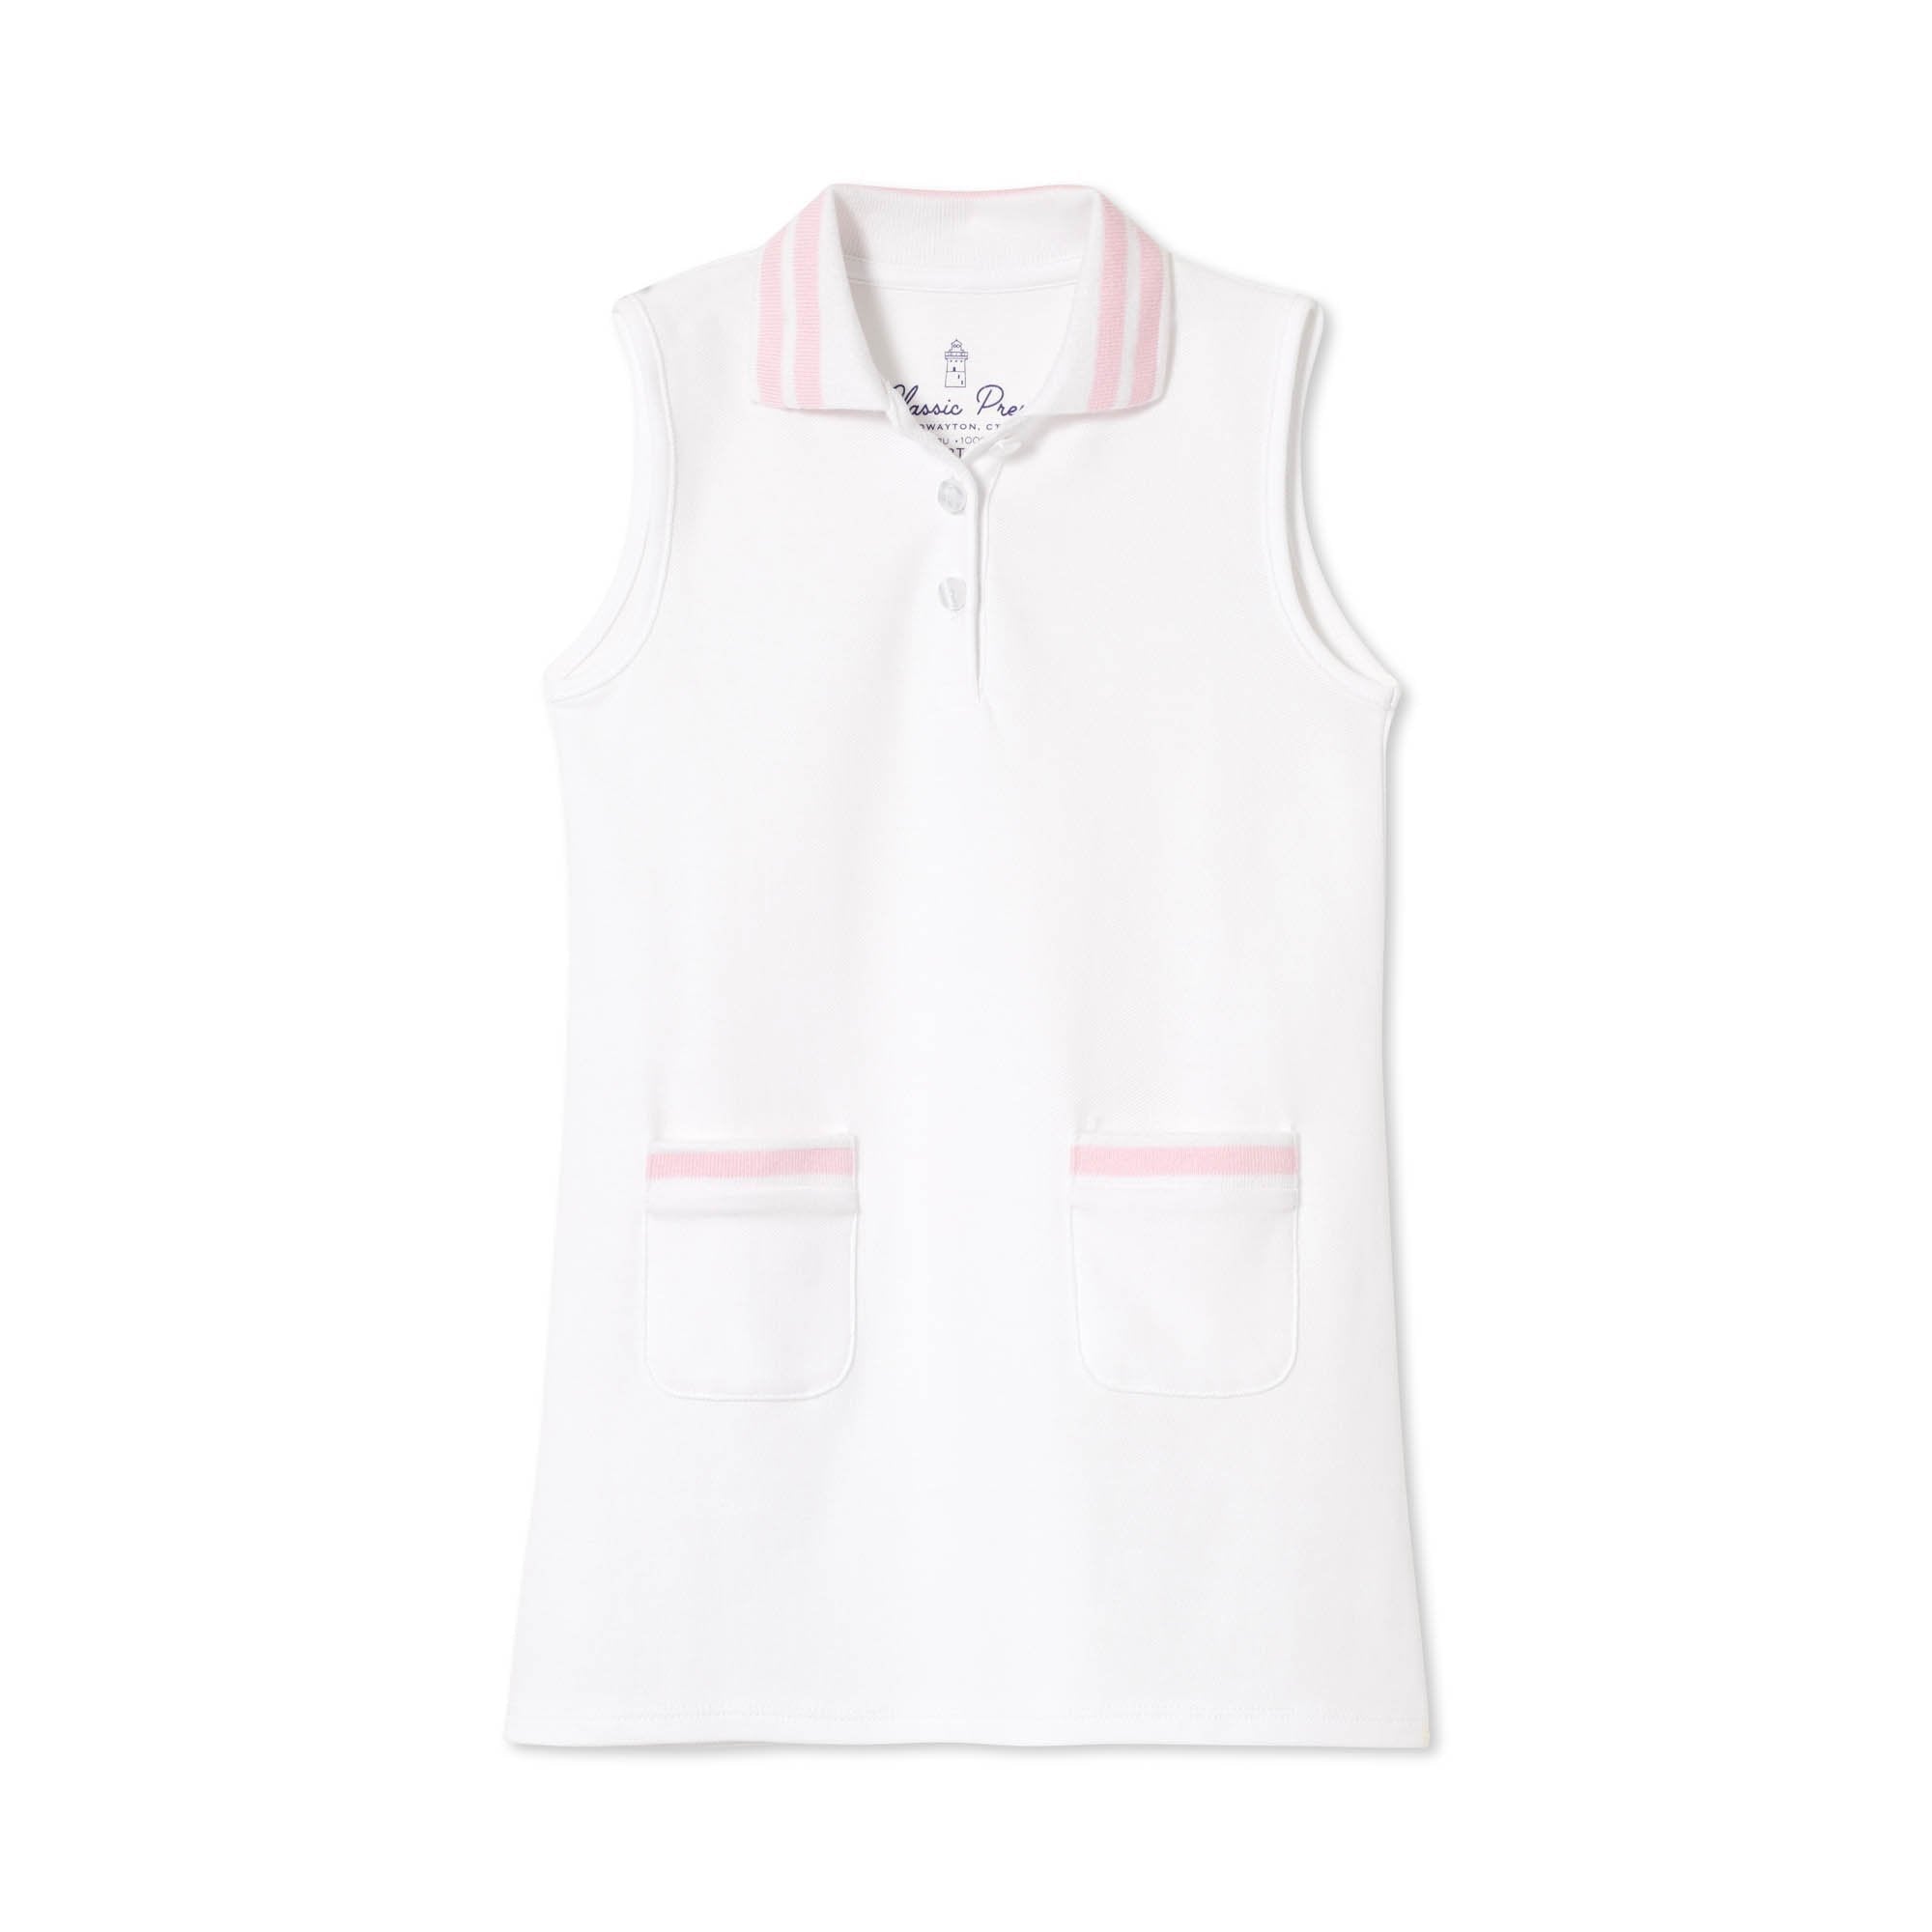 Classic and Preppy Teagan Tennis Dress, White Pique with Pink-Dresses, Jumpsuits and Rompers-Bright White-2T-CPC - Classic Prep Childrenswear